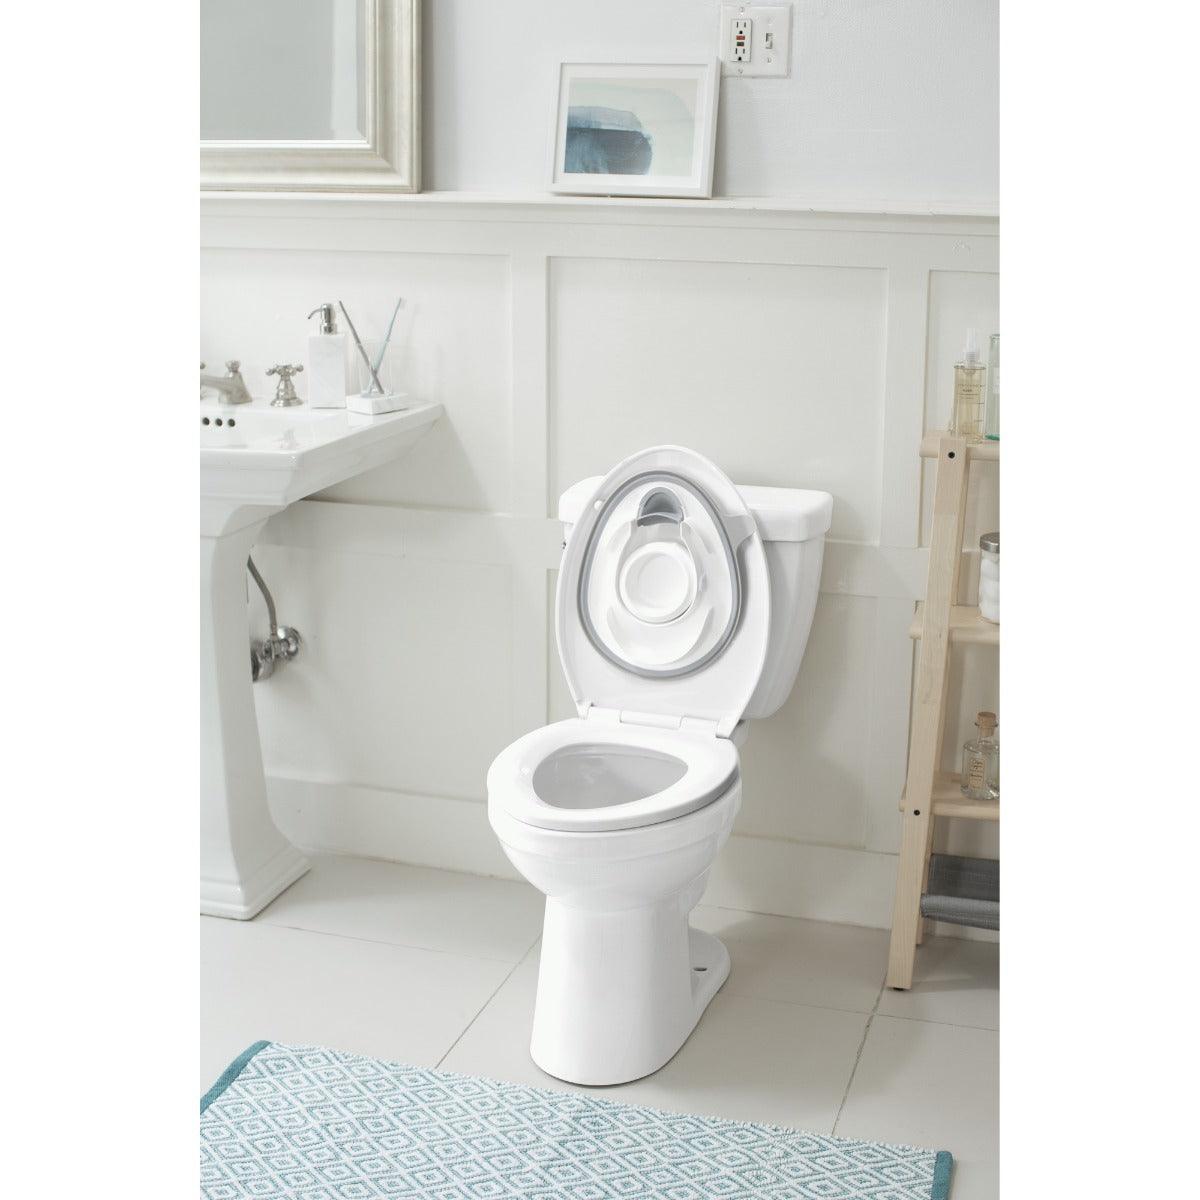 Skip Hop Easy Store Toilet Trainer White - Potty Training For Ages 2-4 Years